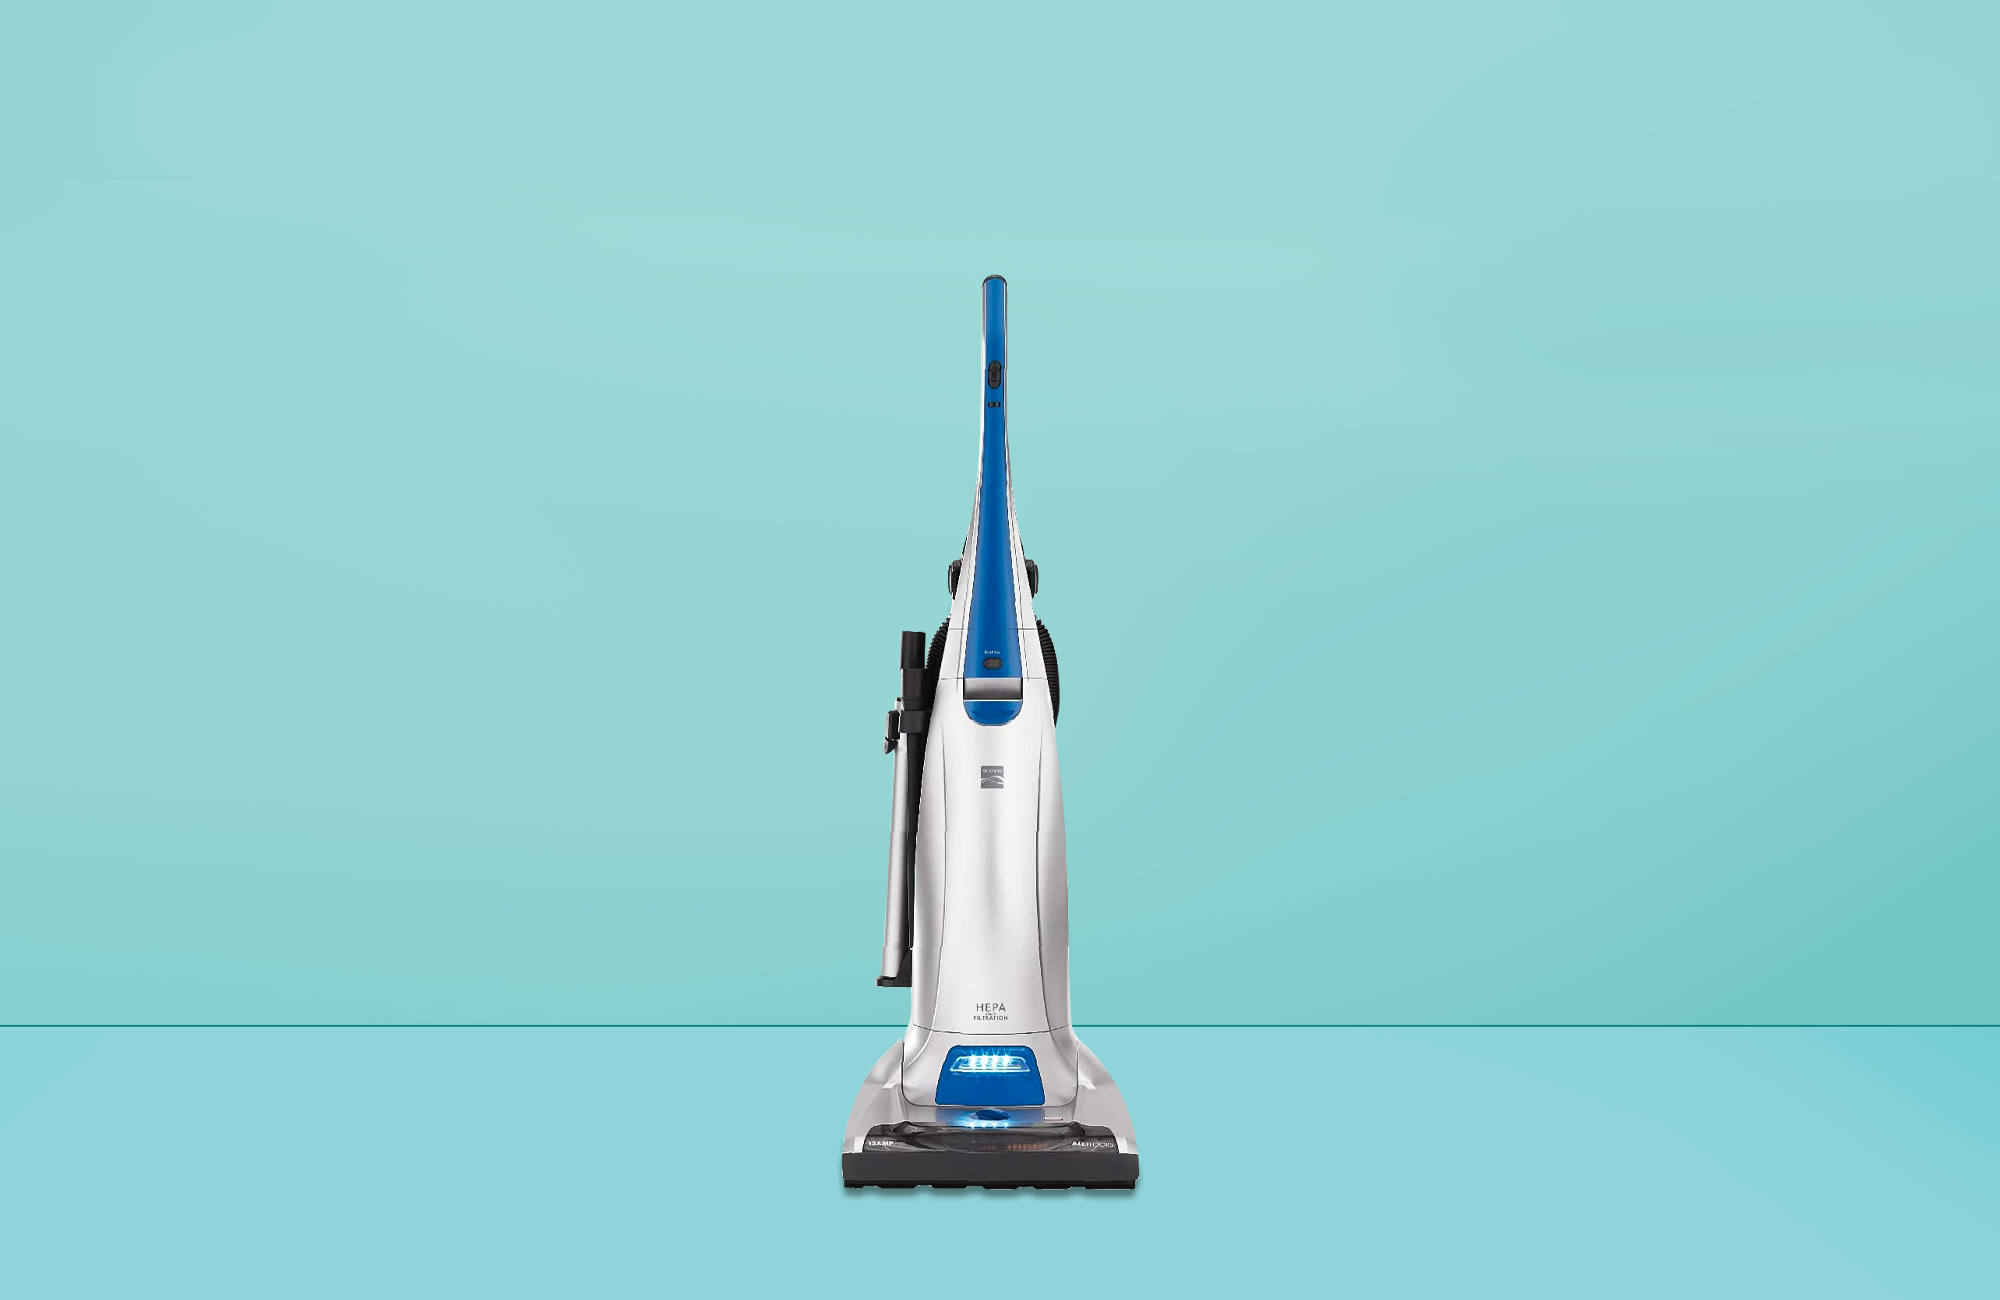 8 Best Vacuums for Pet Hair of 2022 to Erase Fur, Dander and More